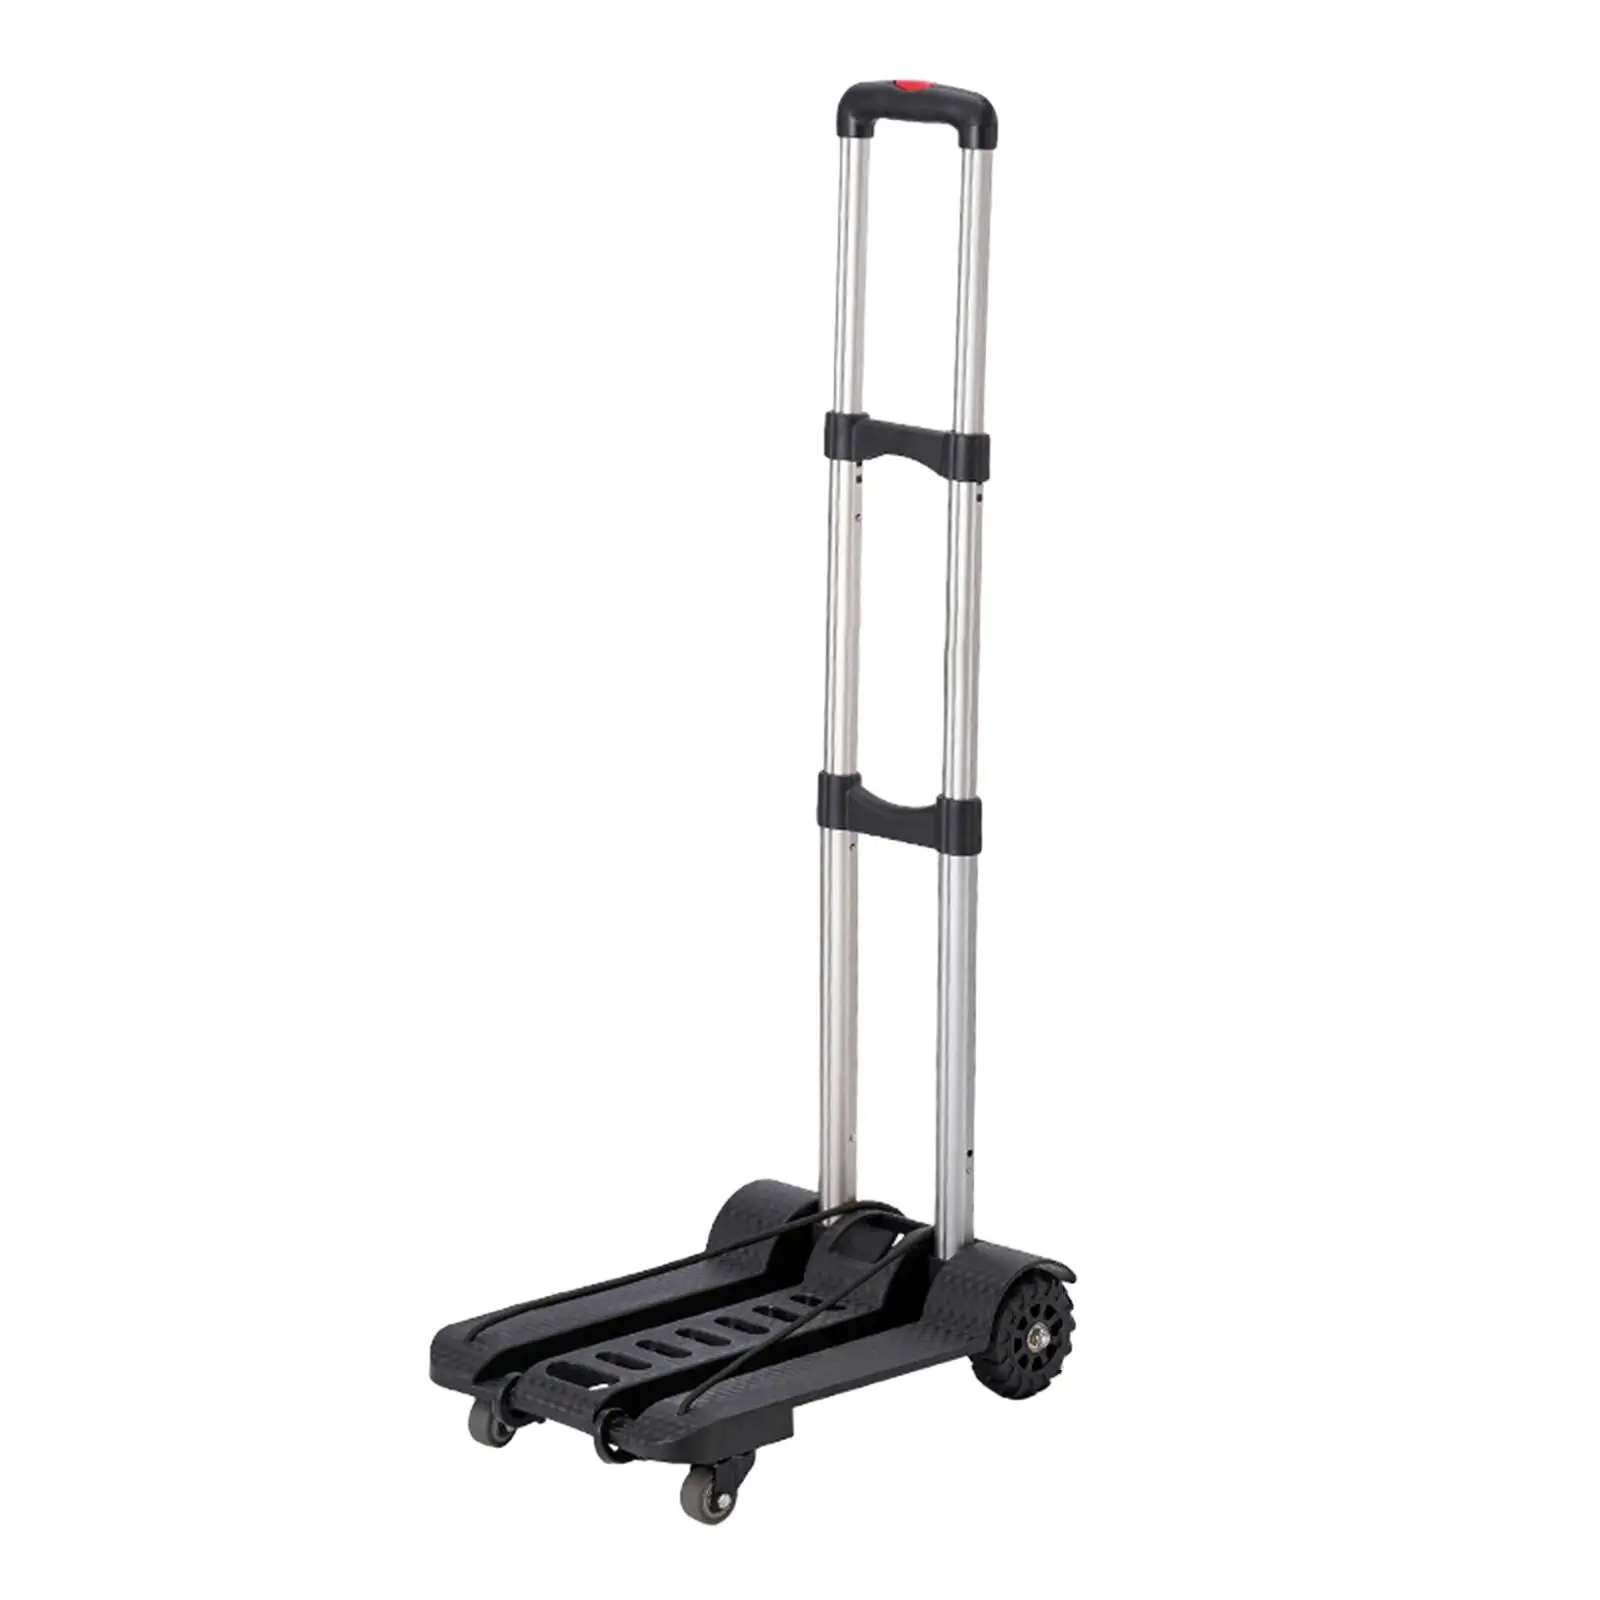 Luggage Trolley Cart Transportation 110lbs Office Moving Folding Hand Truck